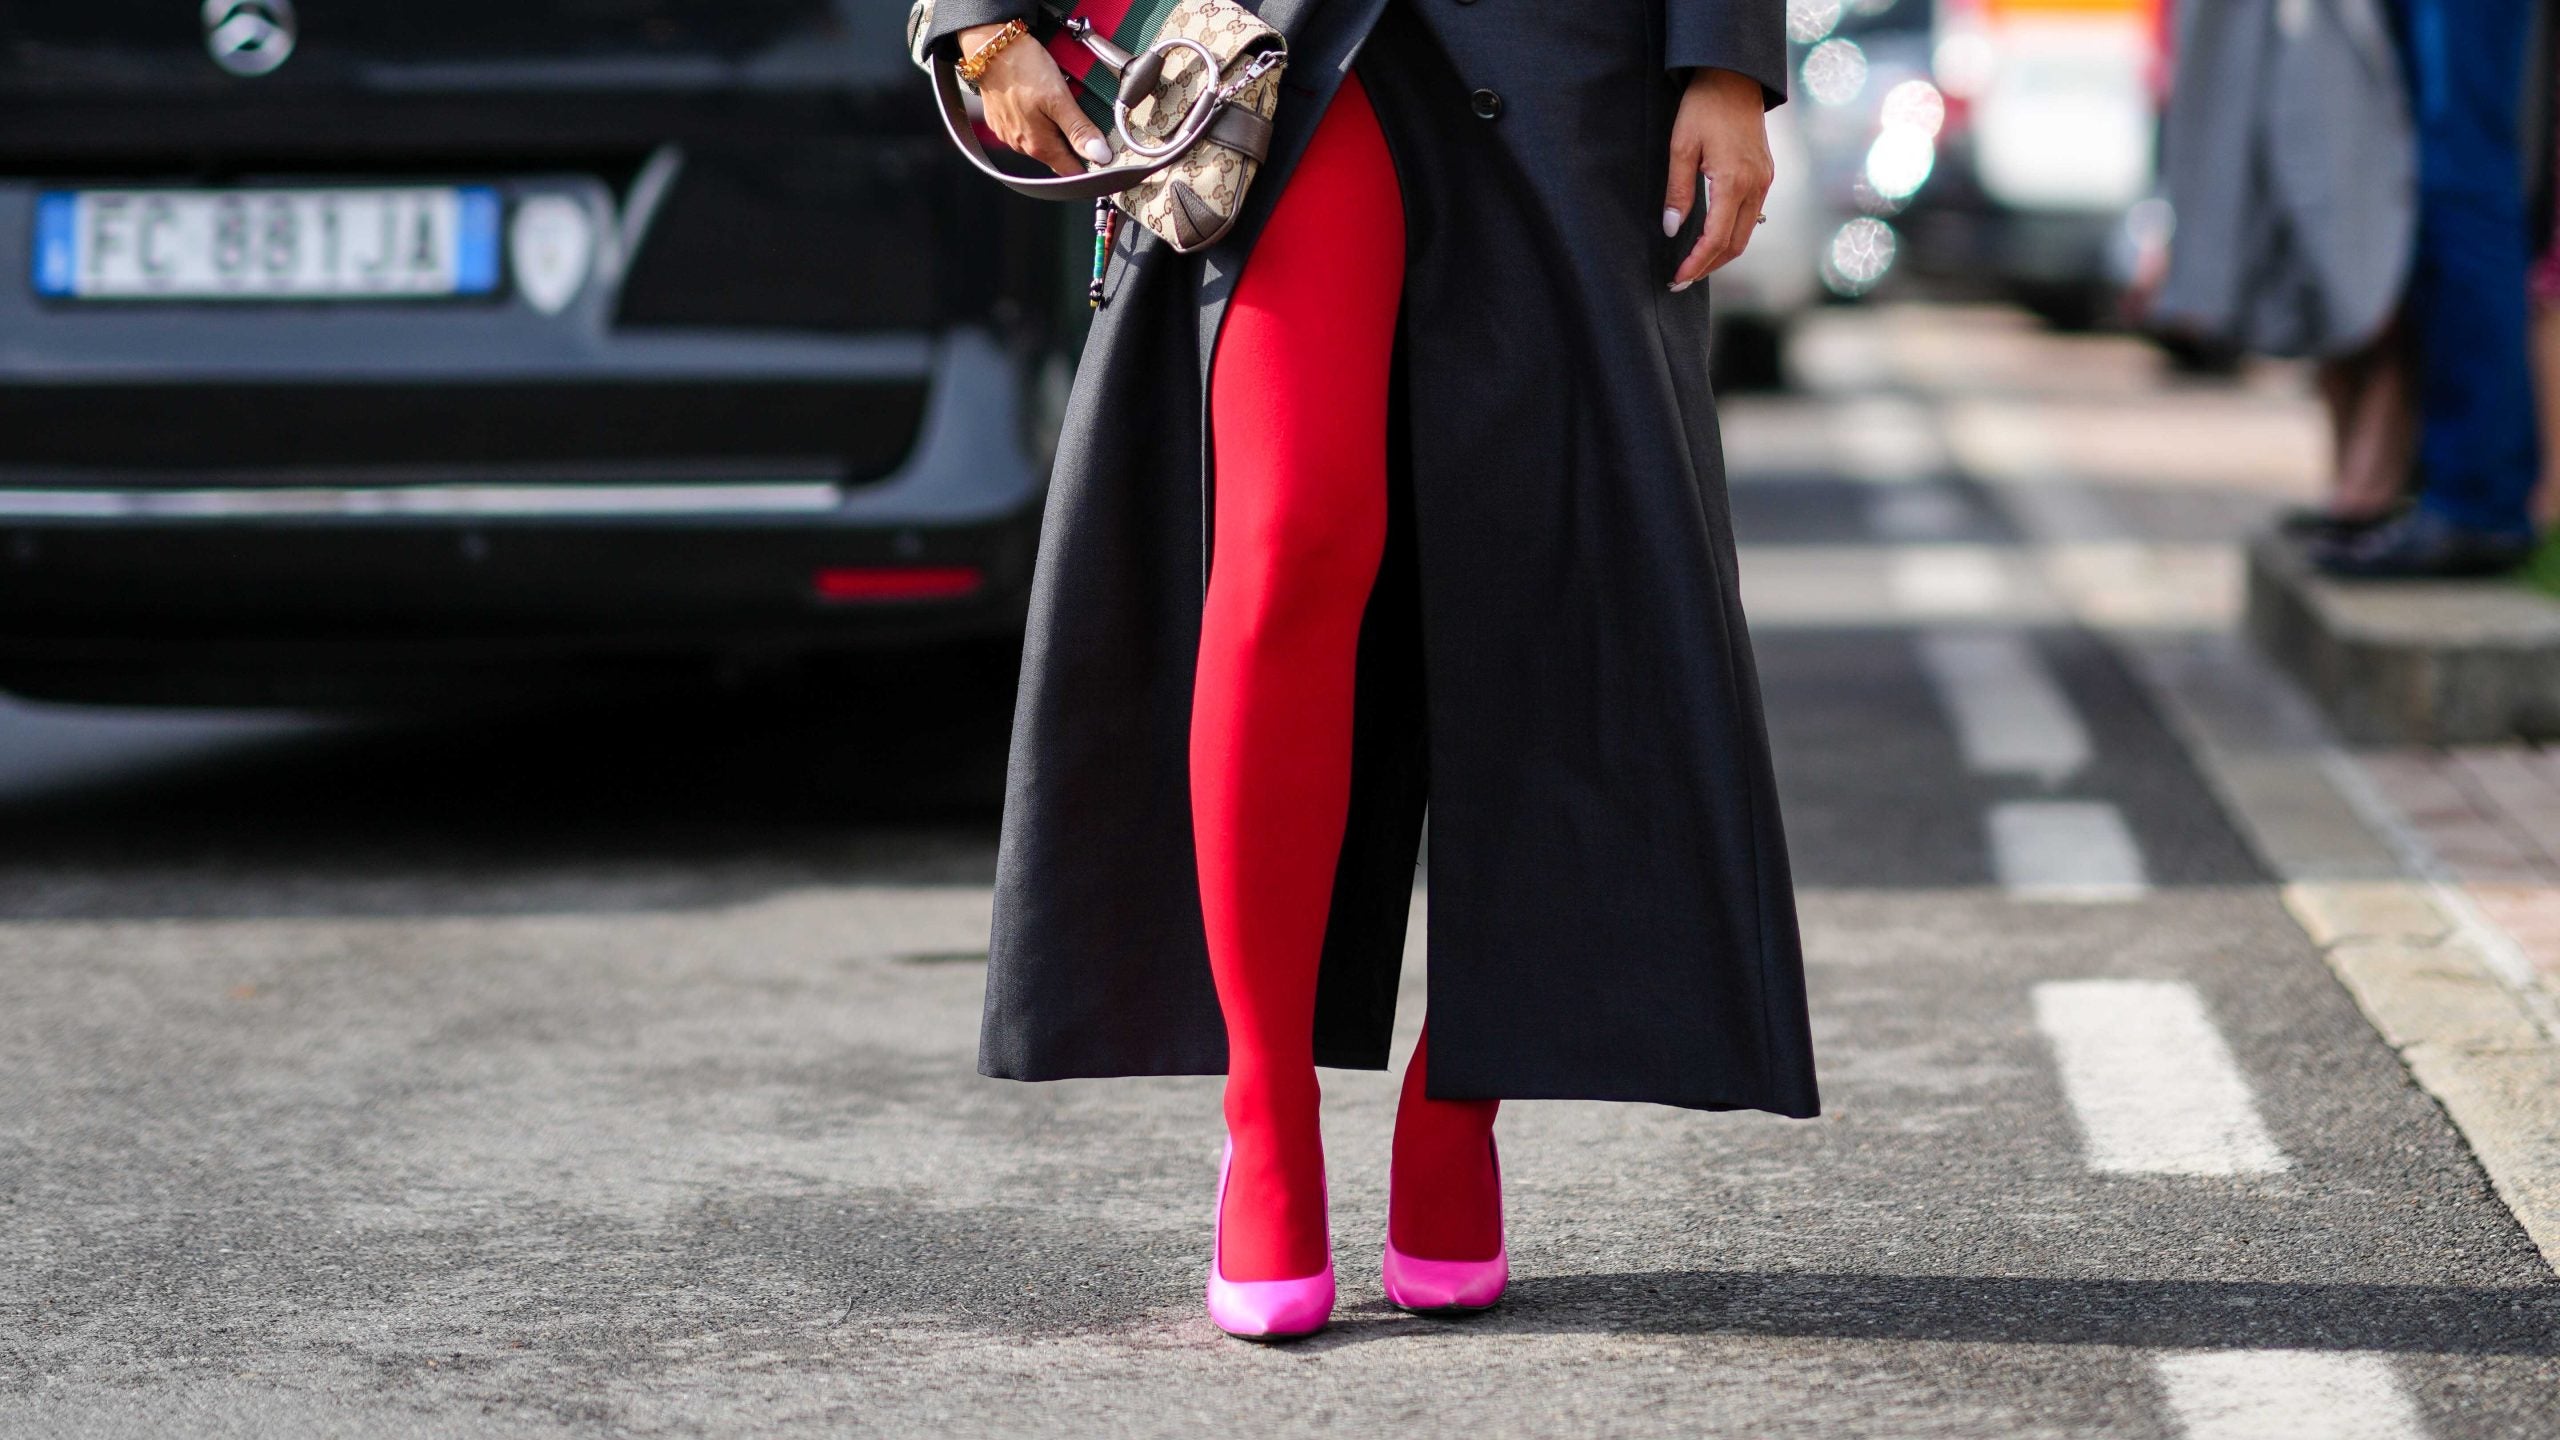 Pants That Aren't Jeans, 8 New Street Style Trends You Can Expect to See  All Over Fashion Week